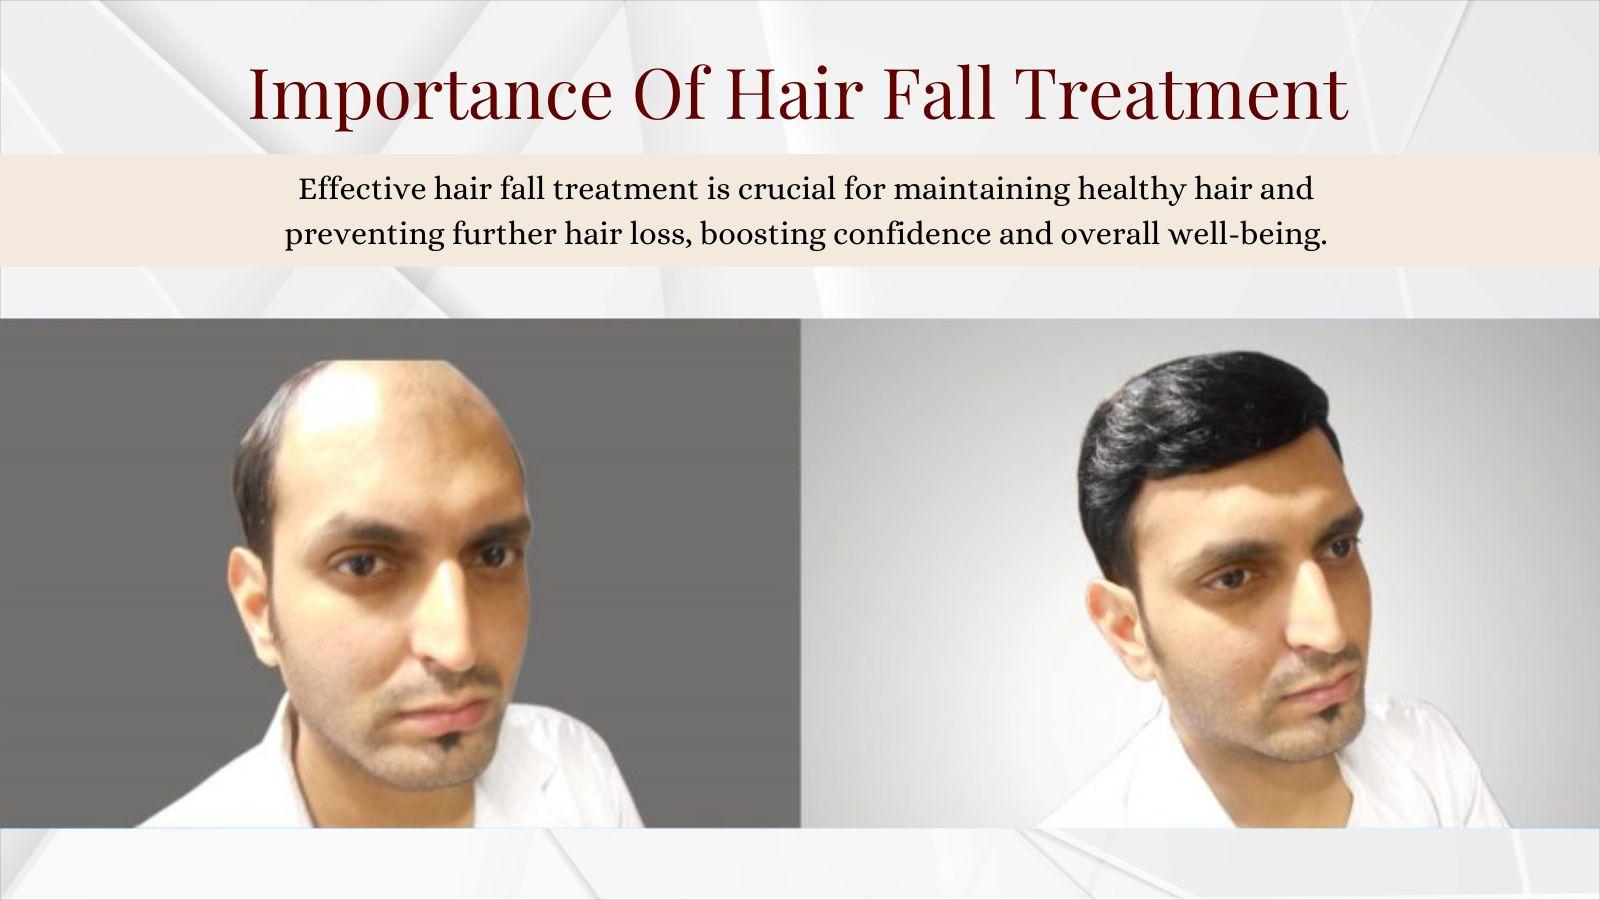 Importance Of Hair Fall Treatment